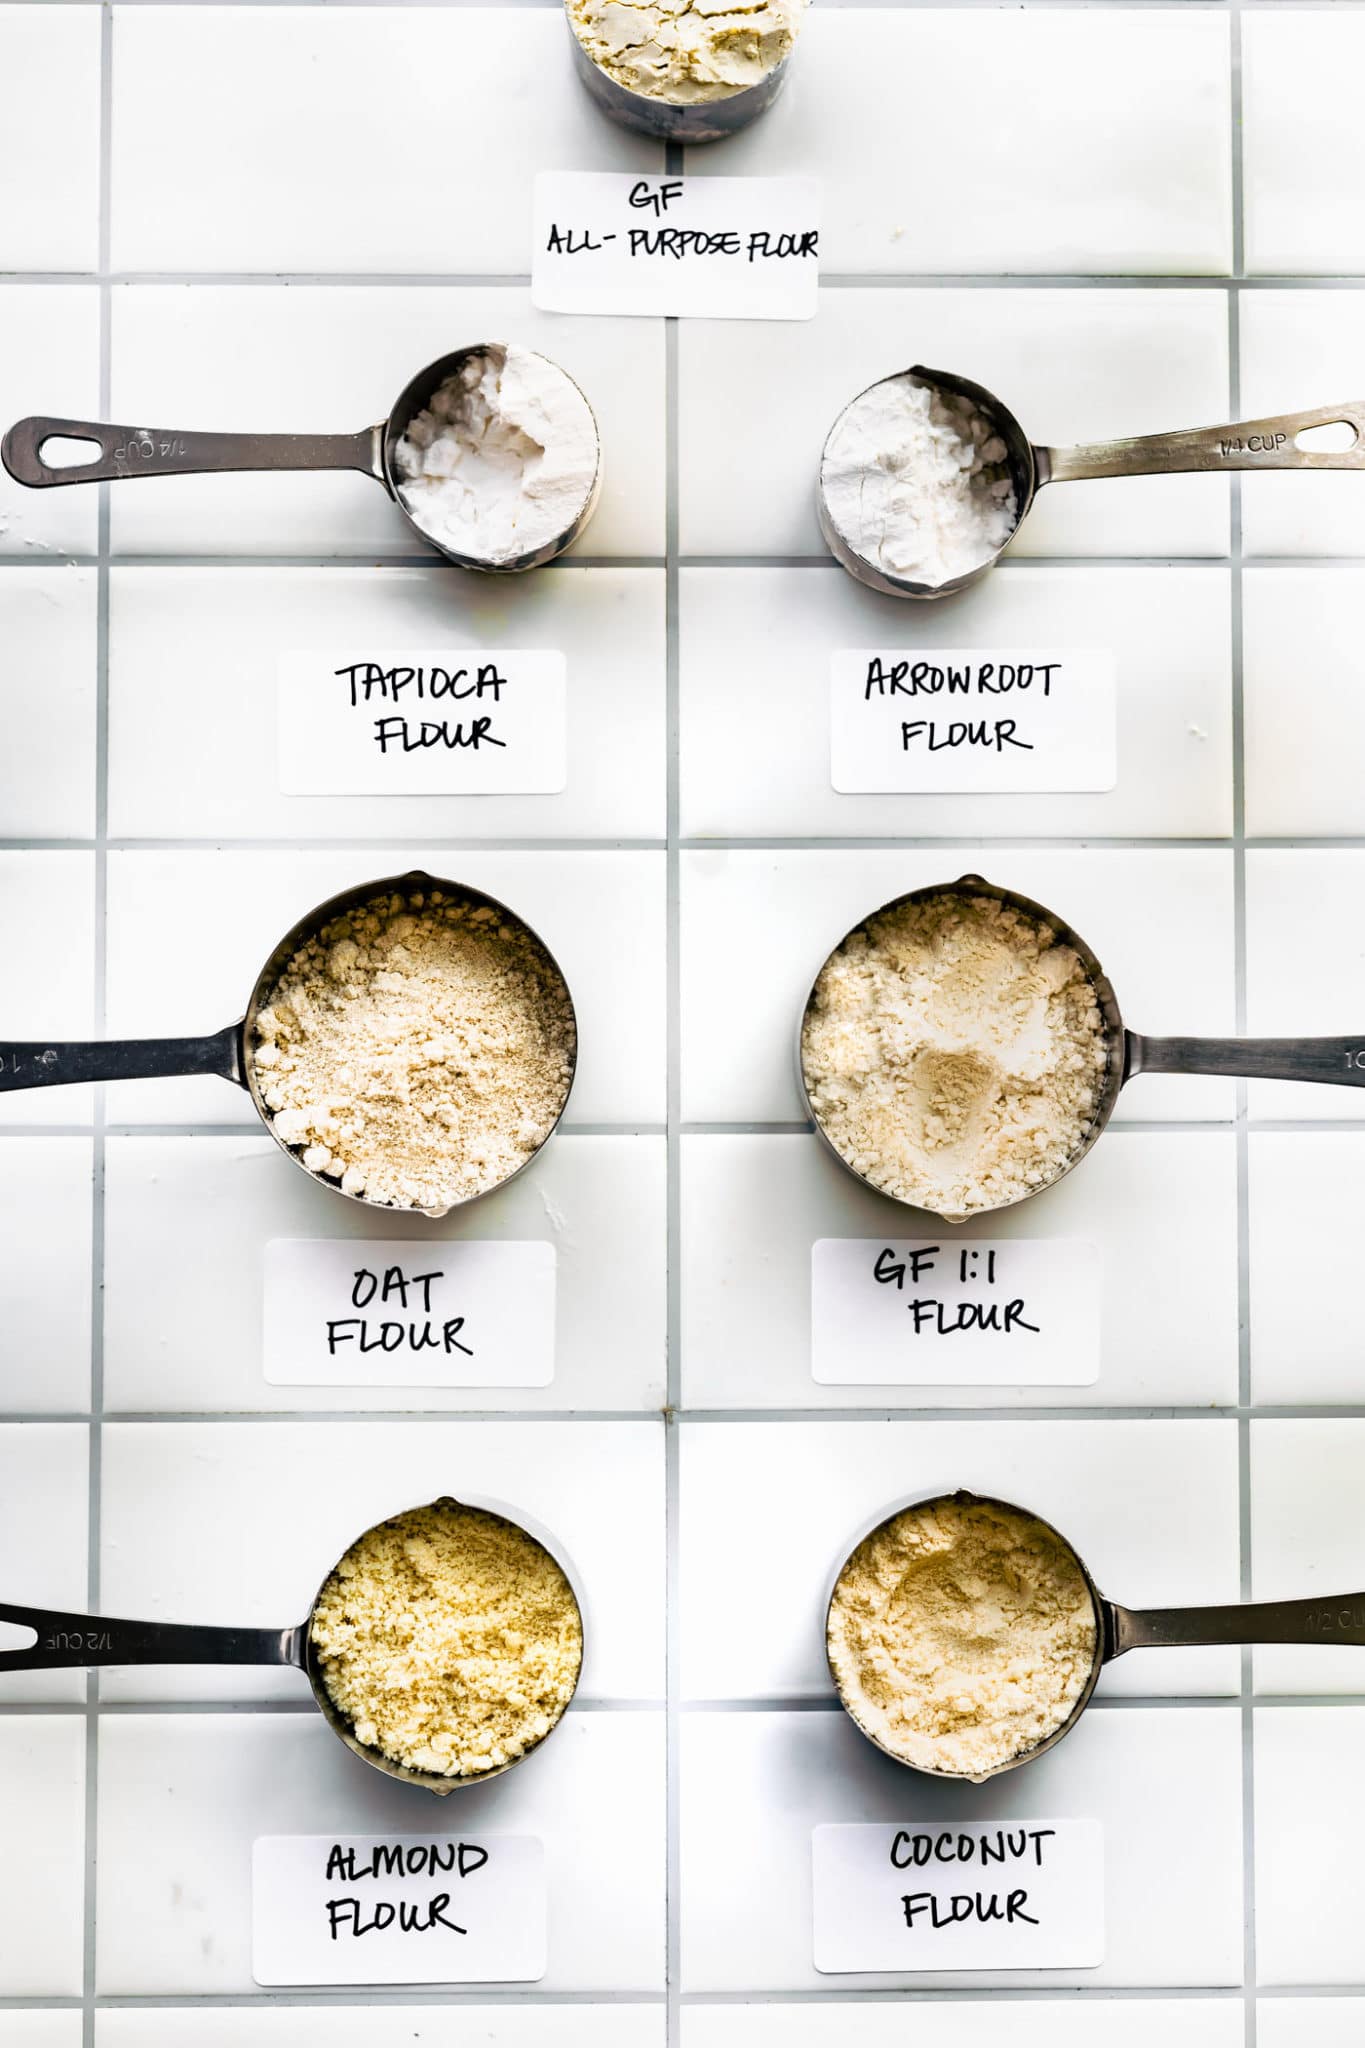 Gluten free flour alternatives in measuring cups labeled